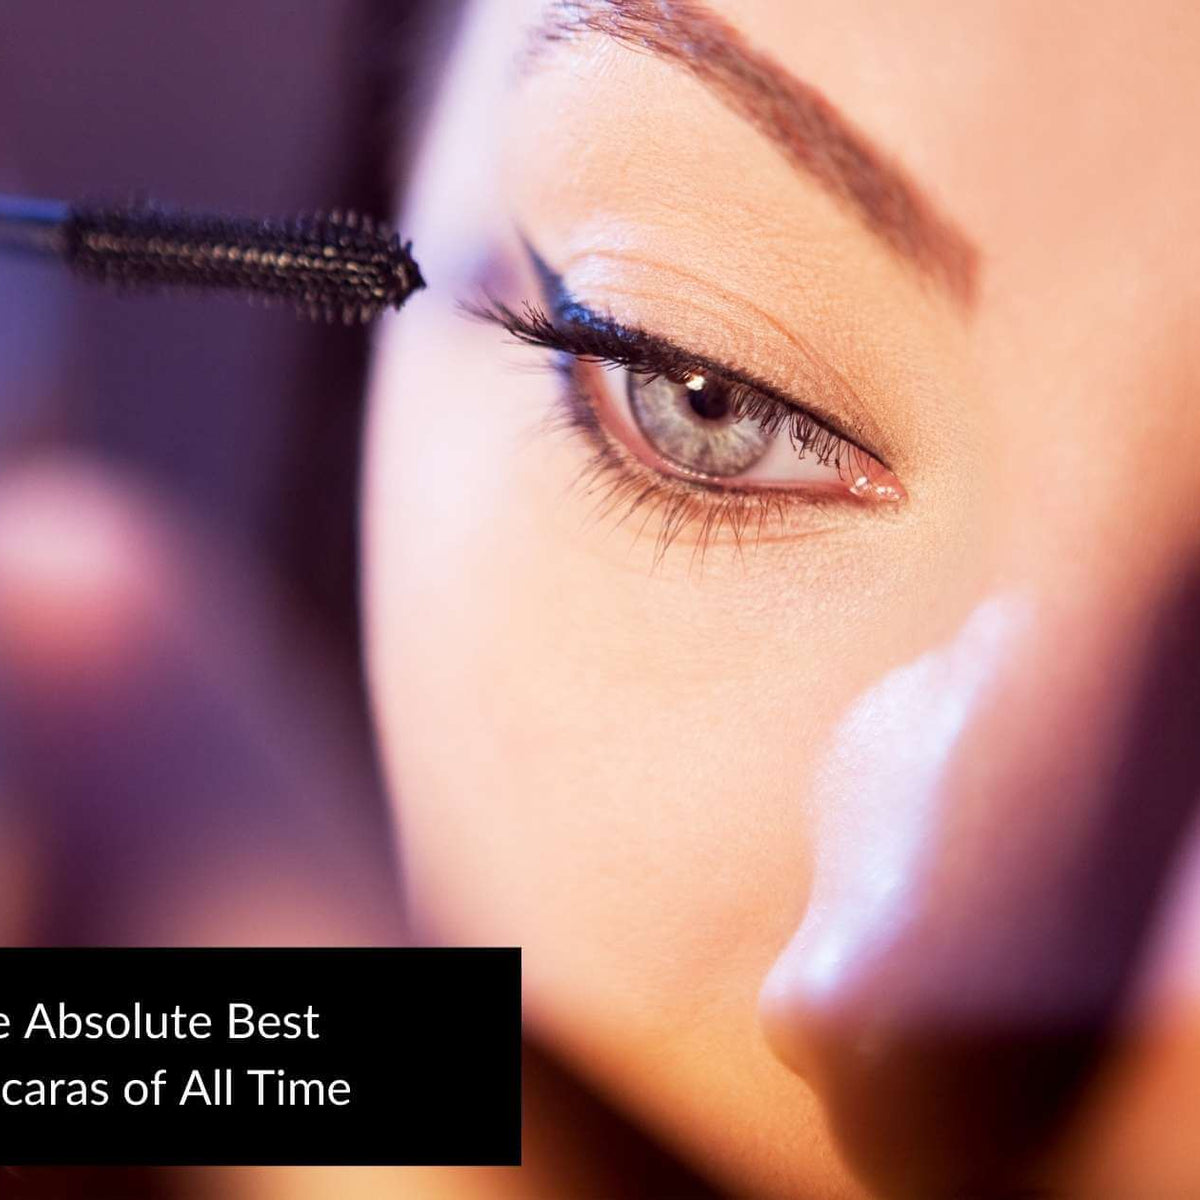 The 28 Absolute Best Time All of – Cosmetics Mascaras Roxie